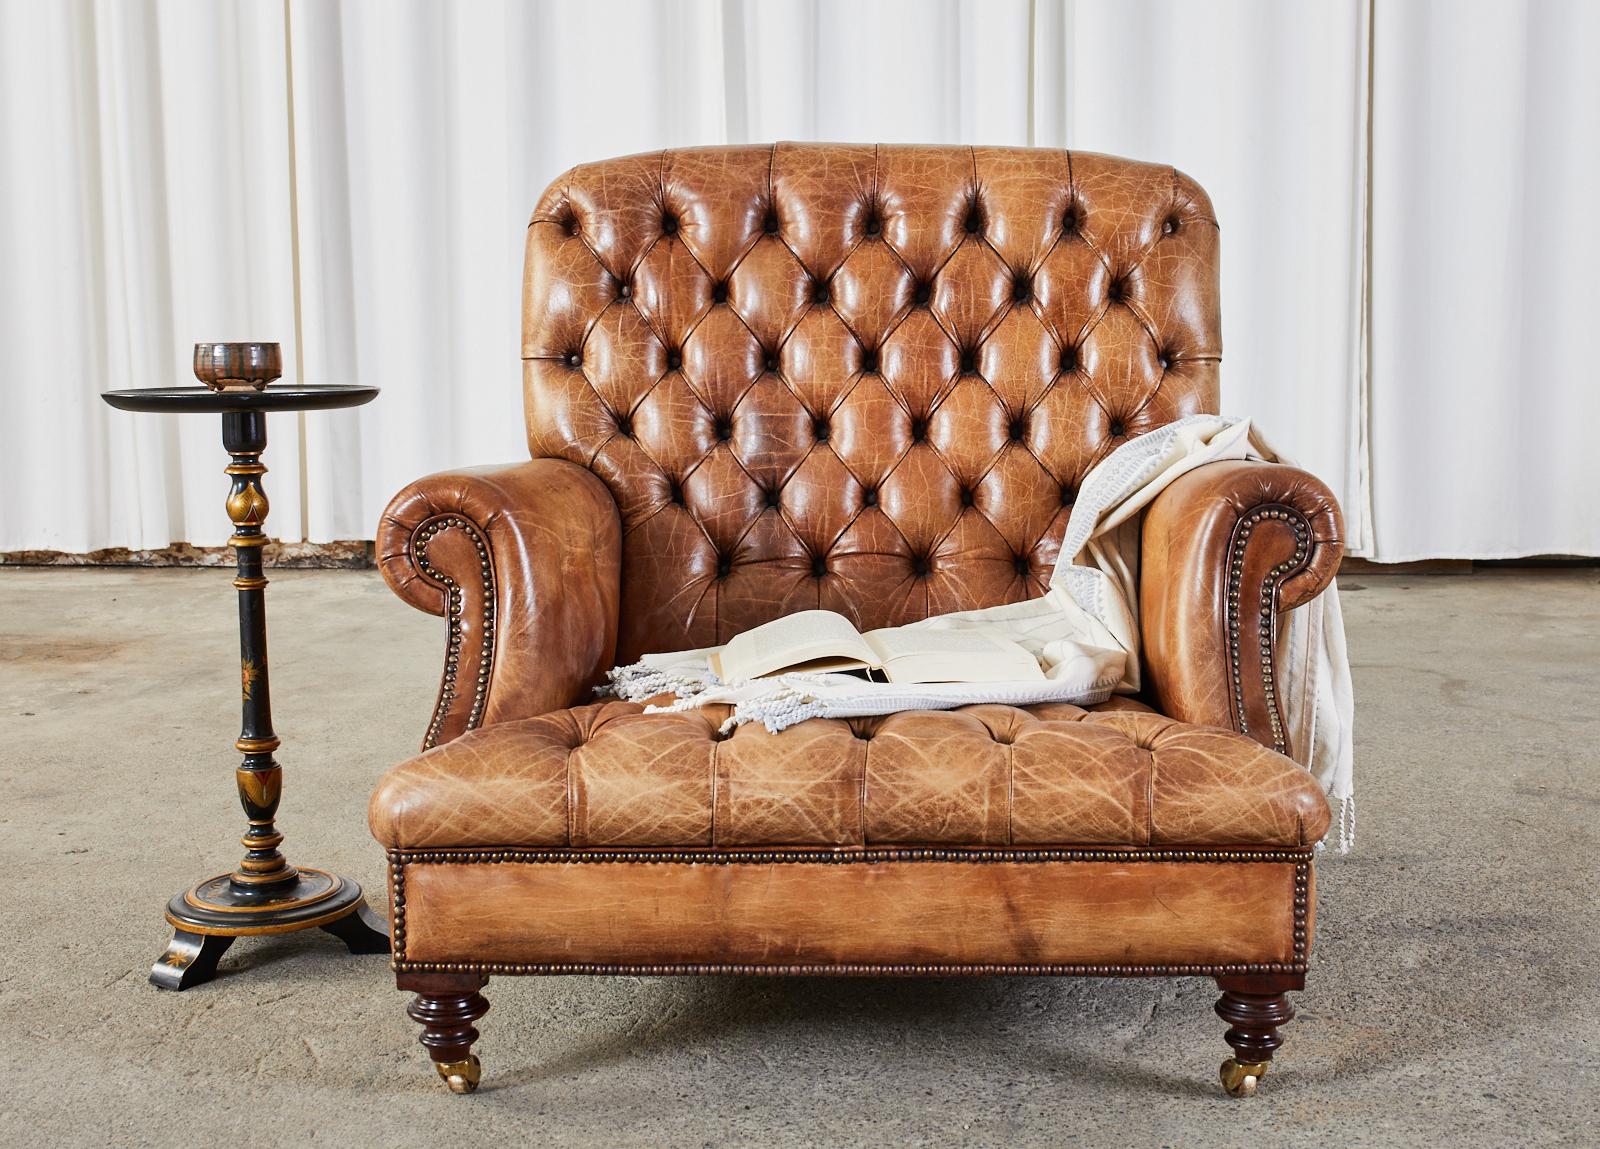 Exceptional grand pair of English tufted cigar leather library chairs or chesterfield armchairs. The chairs feature an oversized hardwood frame that is a chair and a half size. The chairs have English Georgian style rolled arms. The frames were